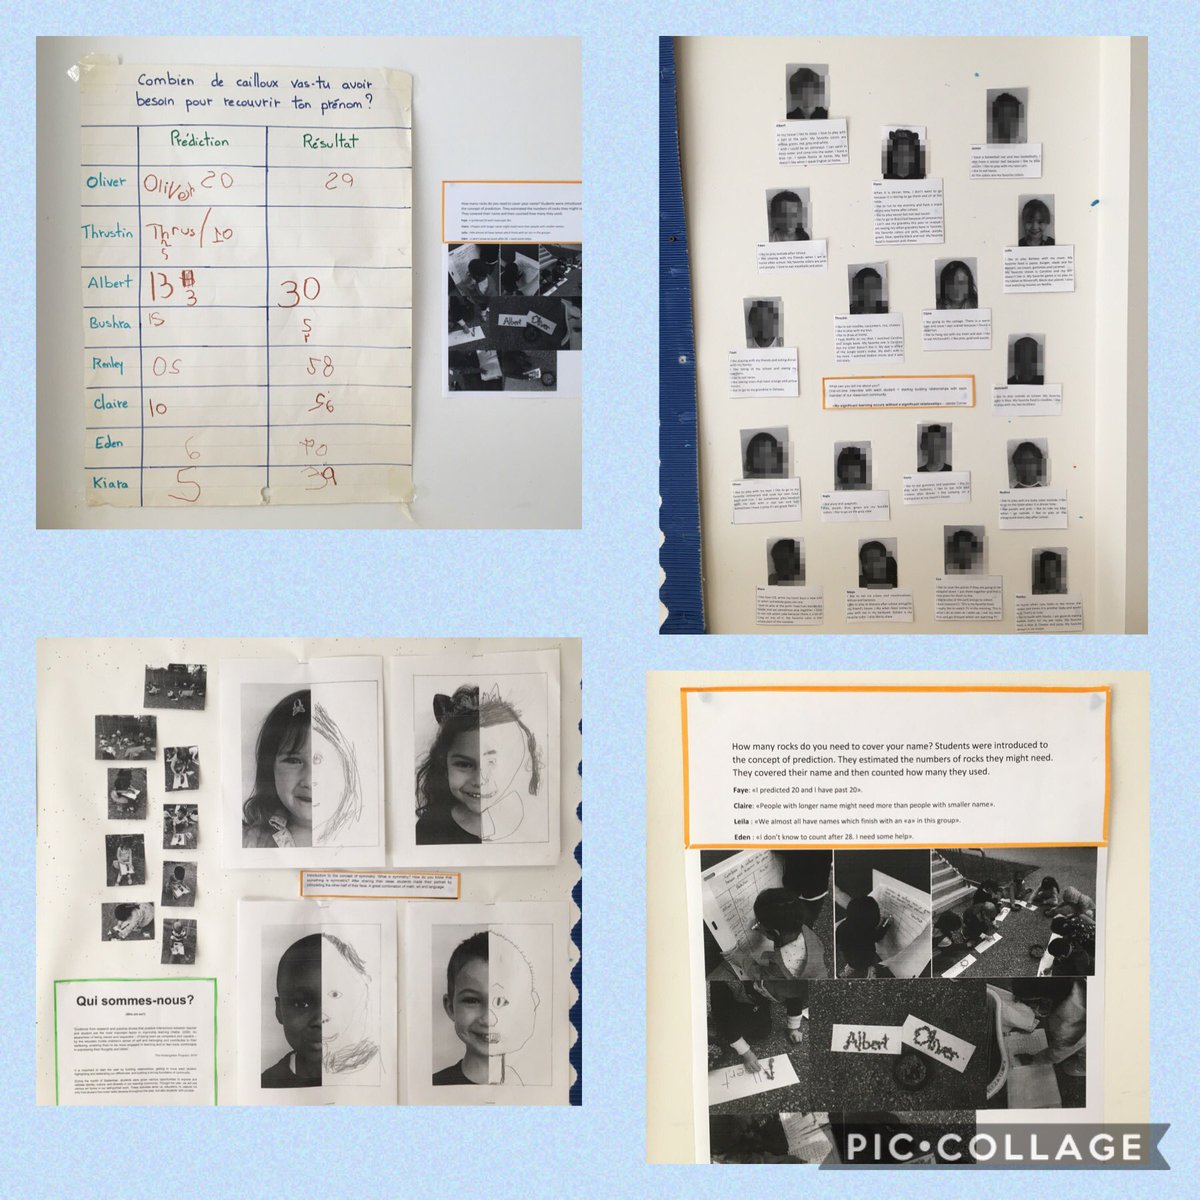 Our first inquiry work on “Qui sommes-nous?” is done. We’ll revisit later this year as it is an ongoing process. Ss worked hard on their activities and are proud to see their work displayed on the walls. #classeK4 #proudstudents #inquiry #identity @CPSpanthersTDSB